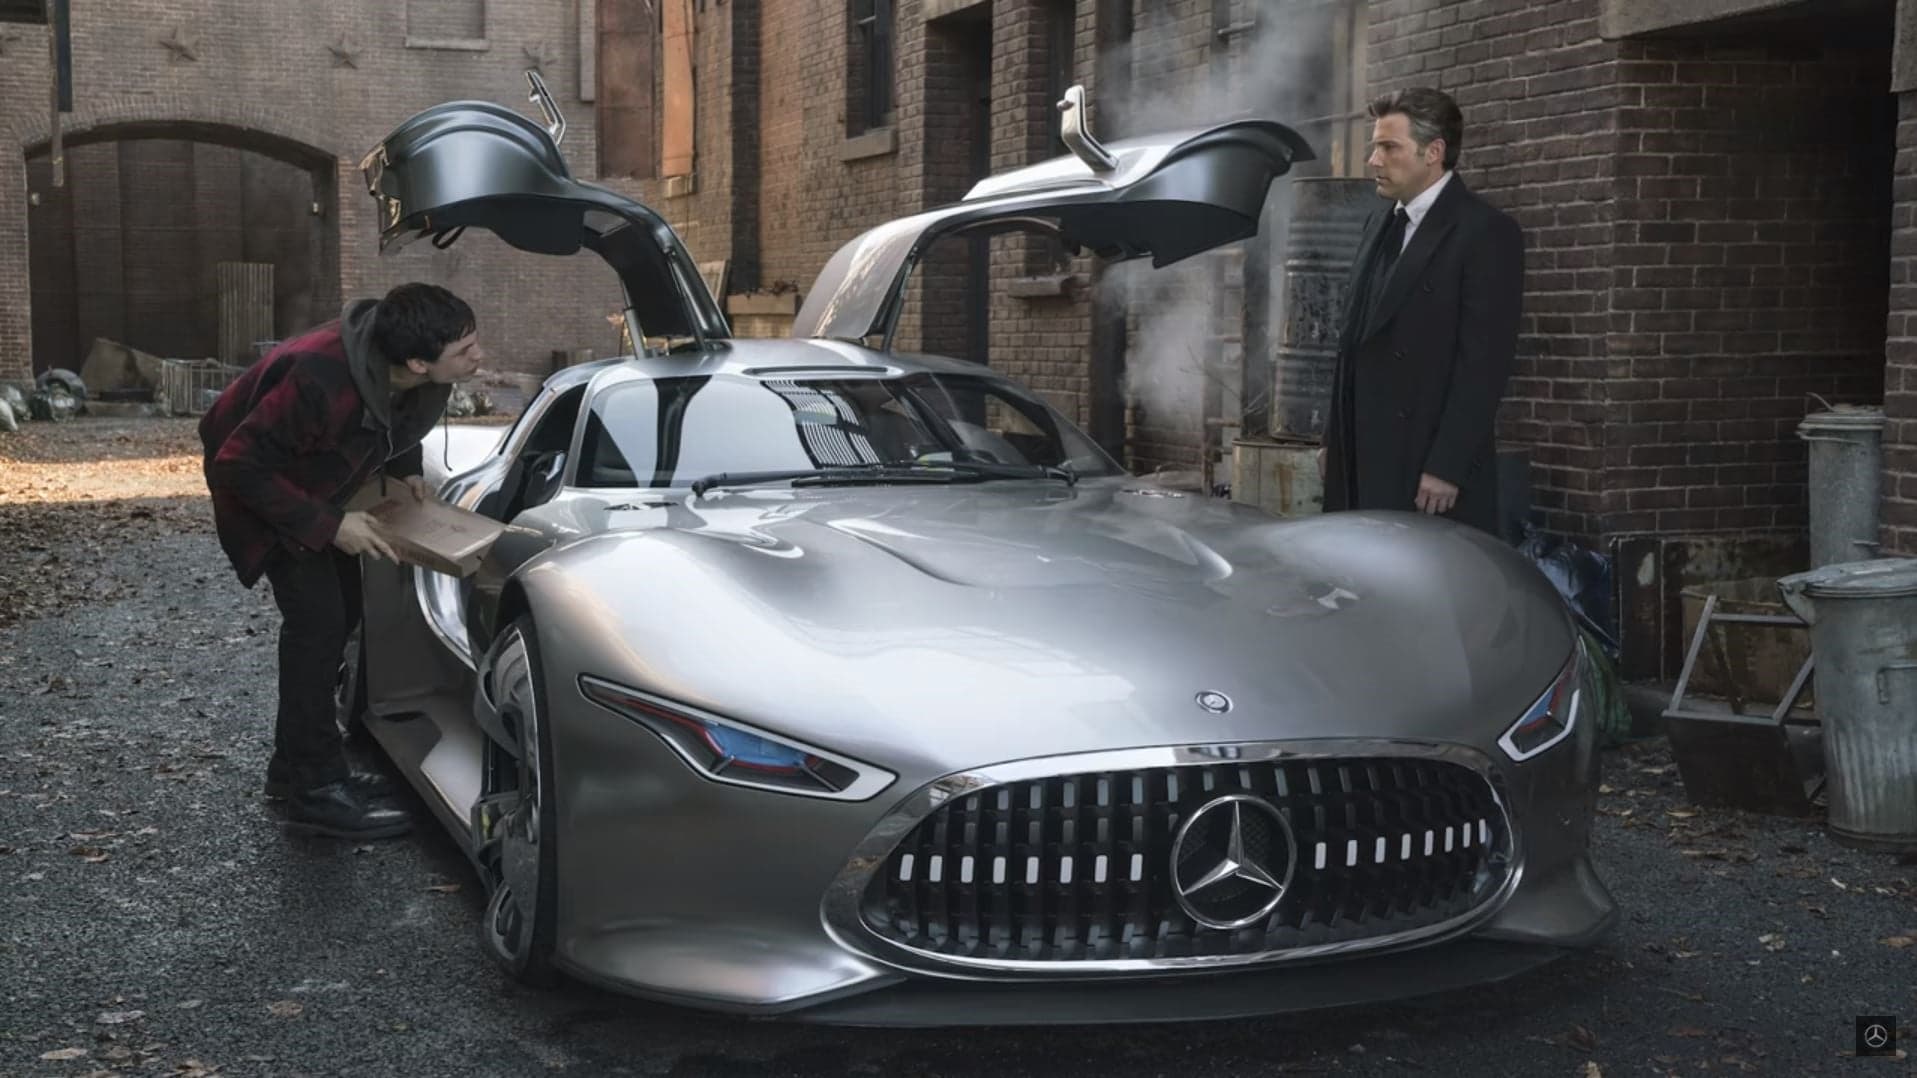 Bruce Wayne Will Drive a Mercedes-AMG Vision Gran Turismo in Justice League